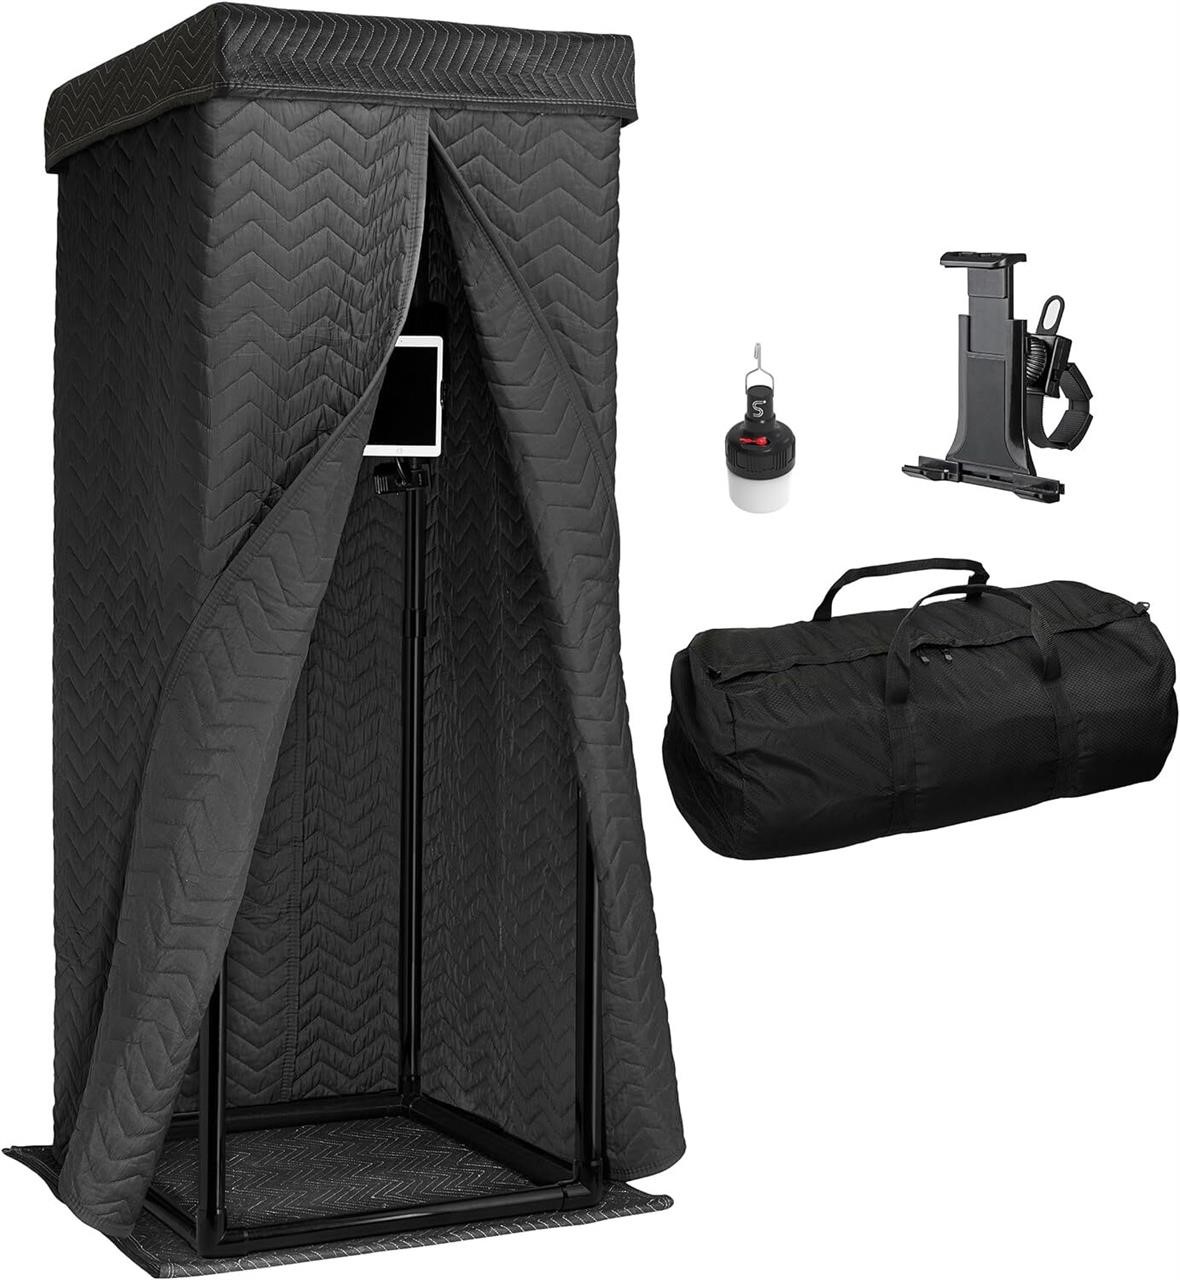 Ultimate Vocal Booth - 360 Degree Shield